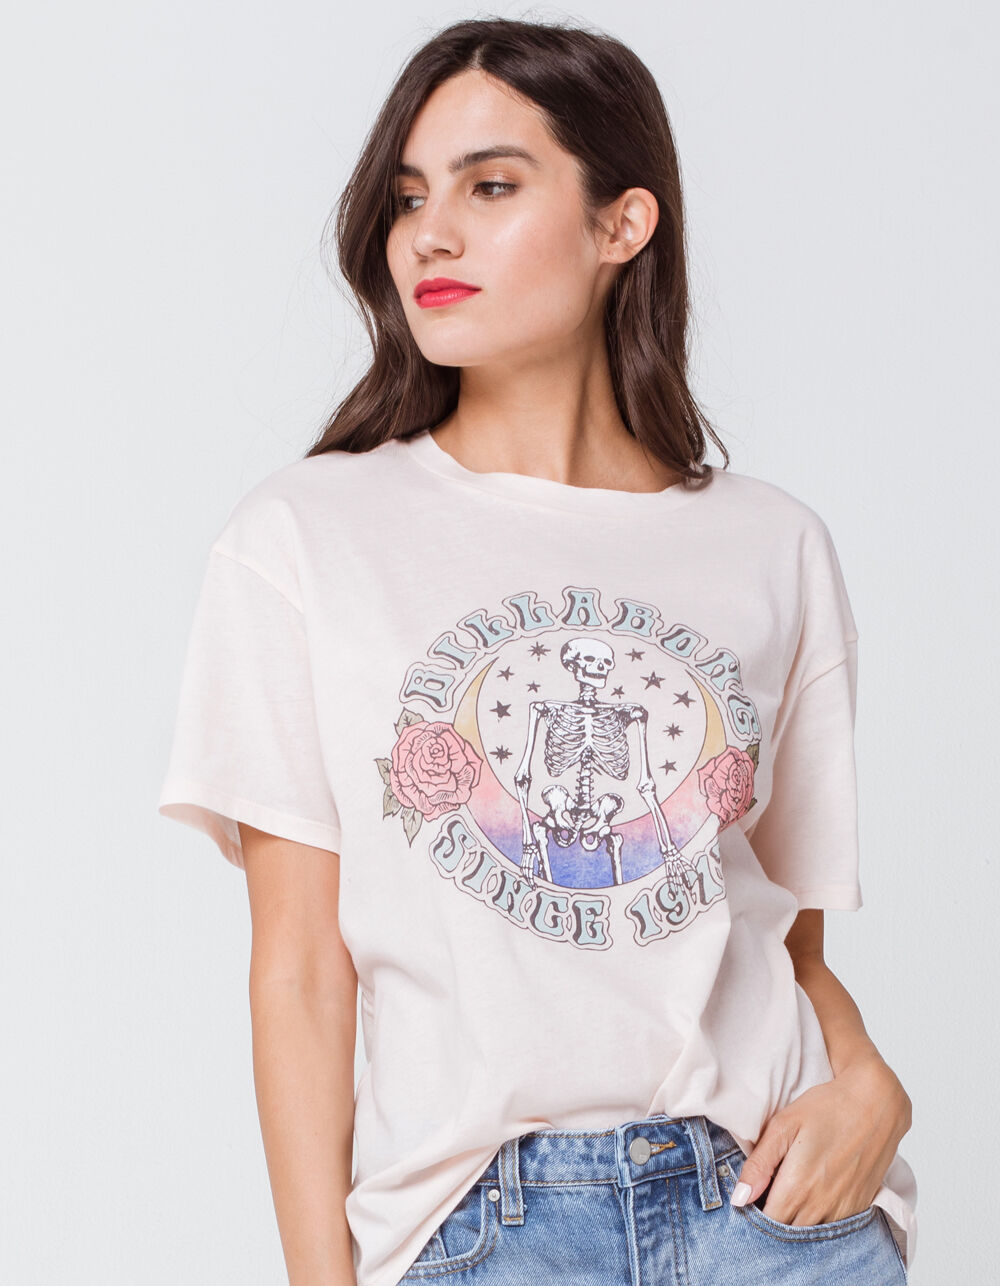 BILLABONG Riding Solo Womens Tee image number 0